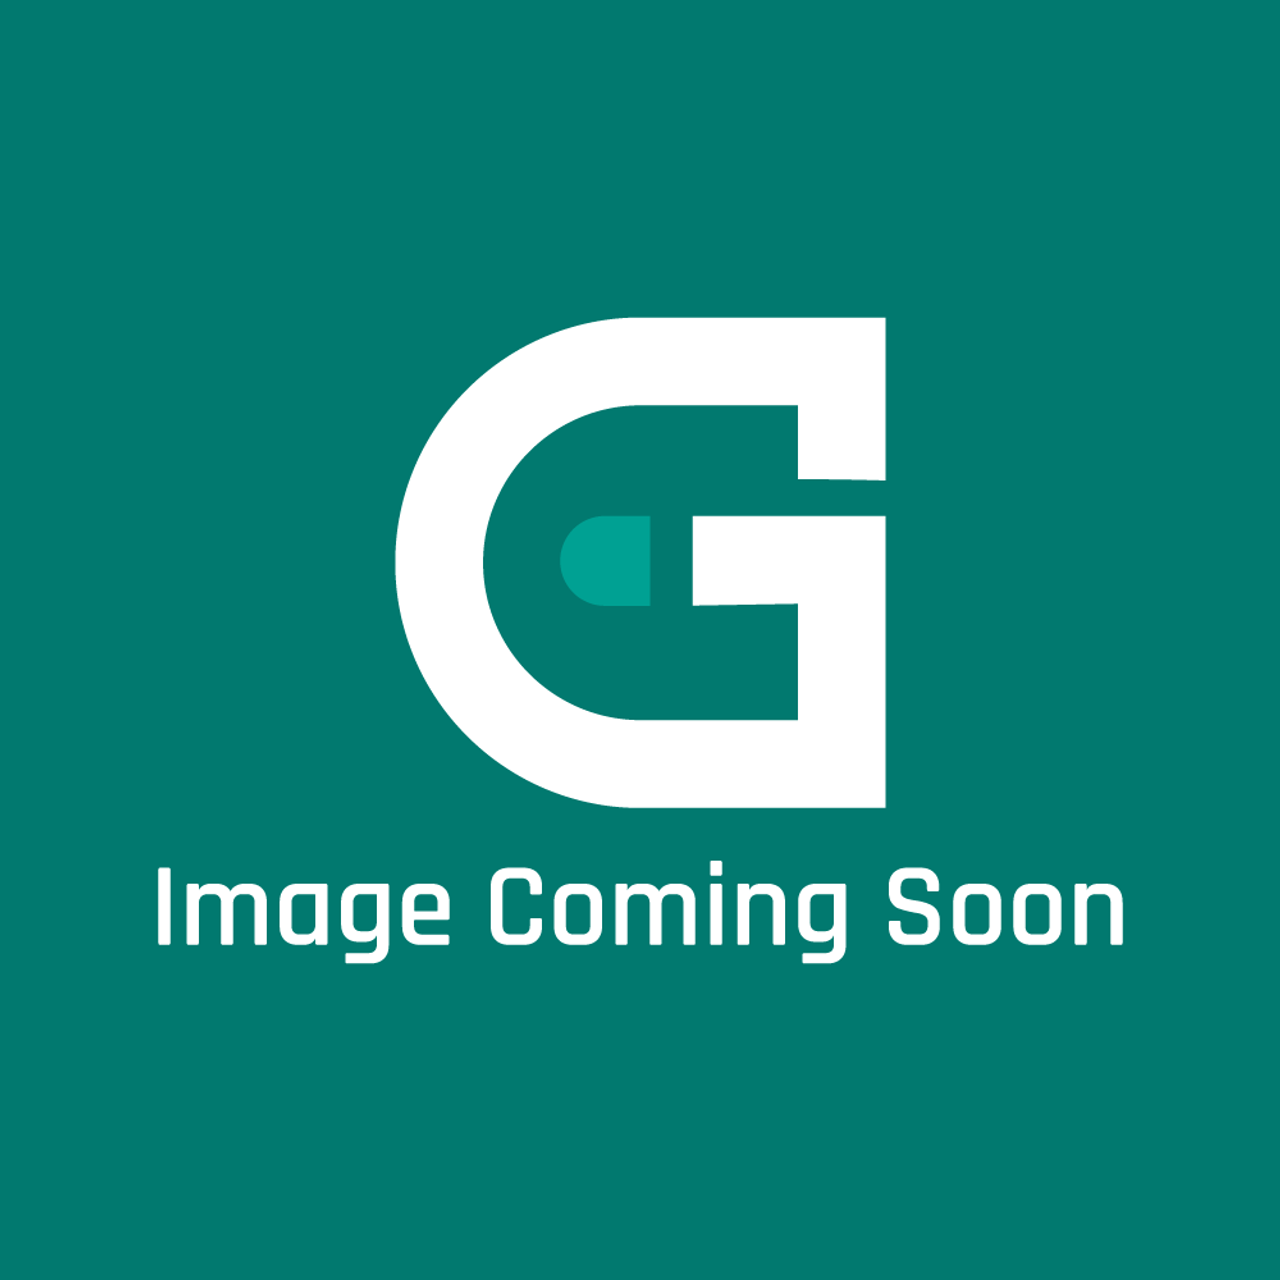 AGA Marvel AE2M280370 - Rh Front Plate Clamp - Image Coming Soon!